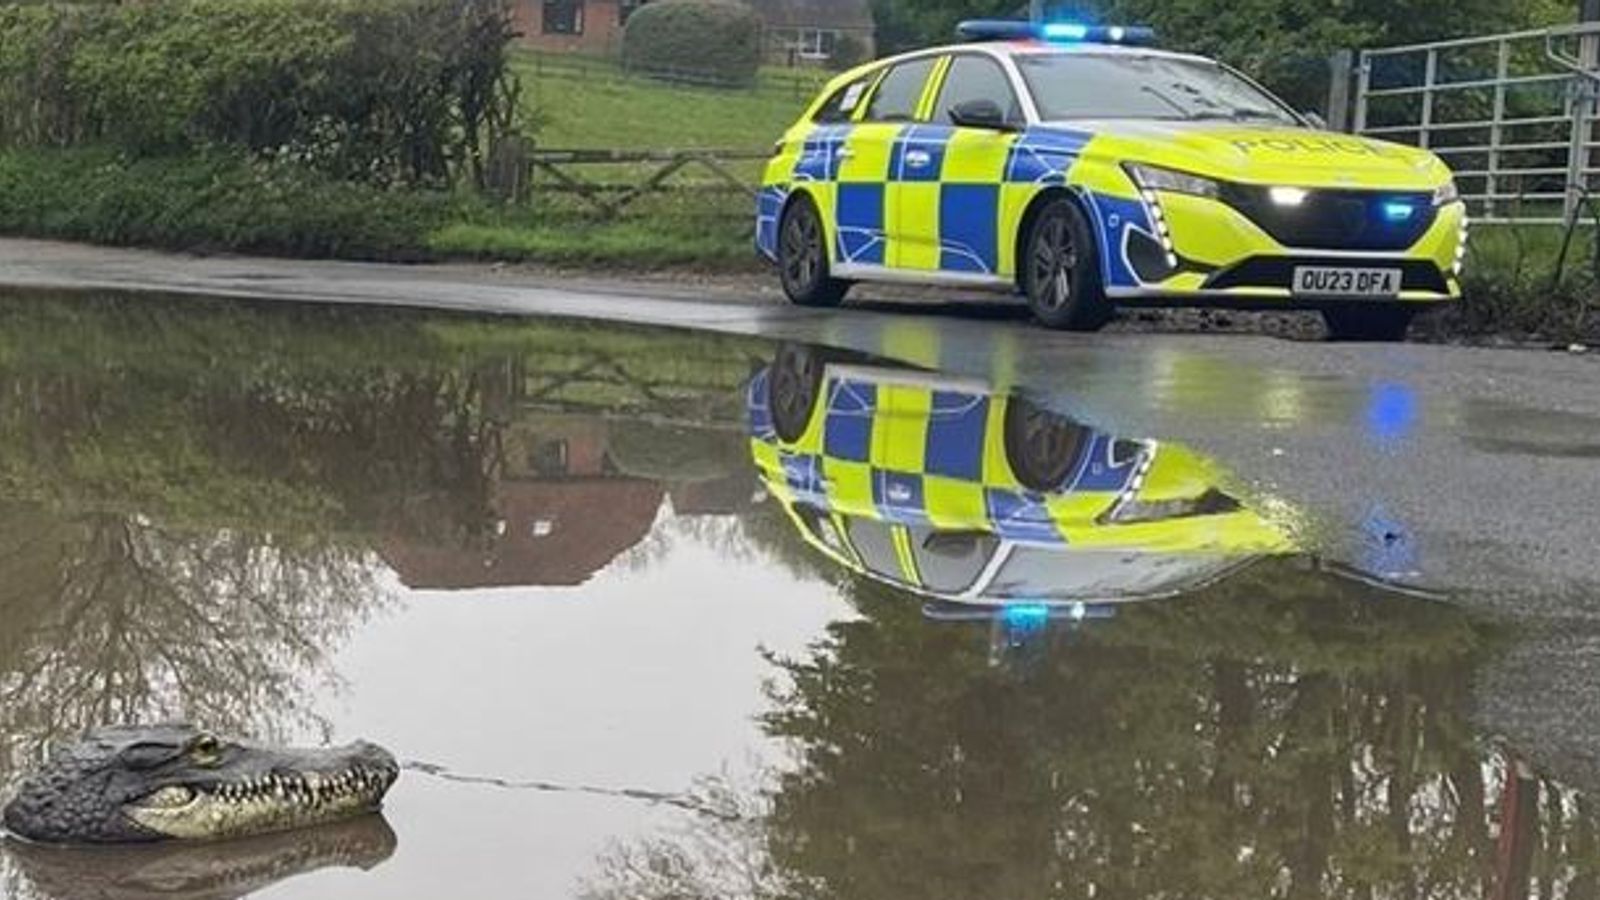 'So brave': Social media users enjoy police response to reports of crocodile in English village